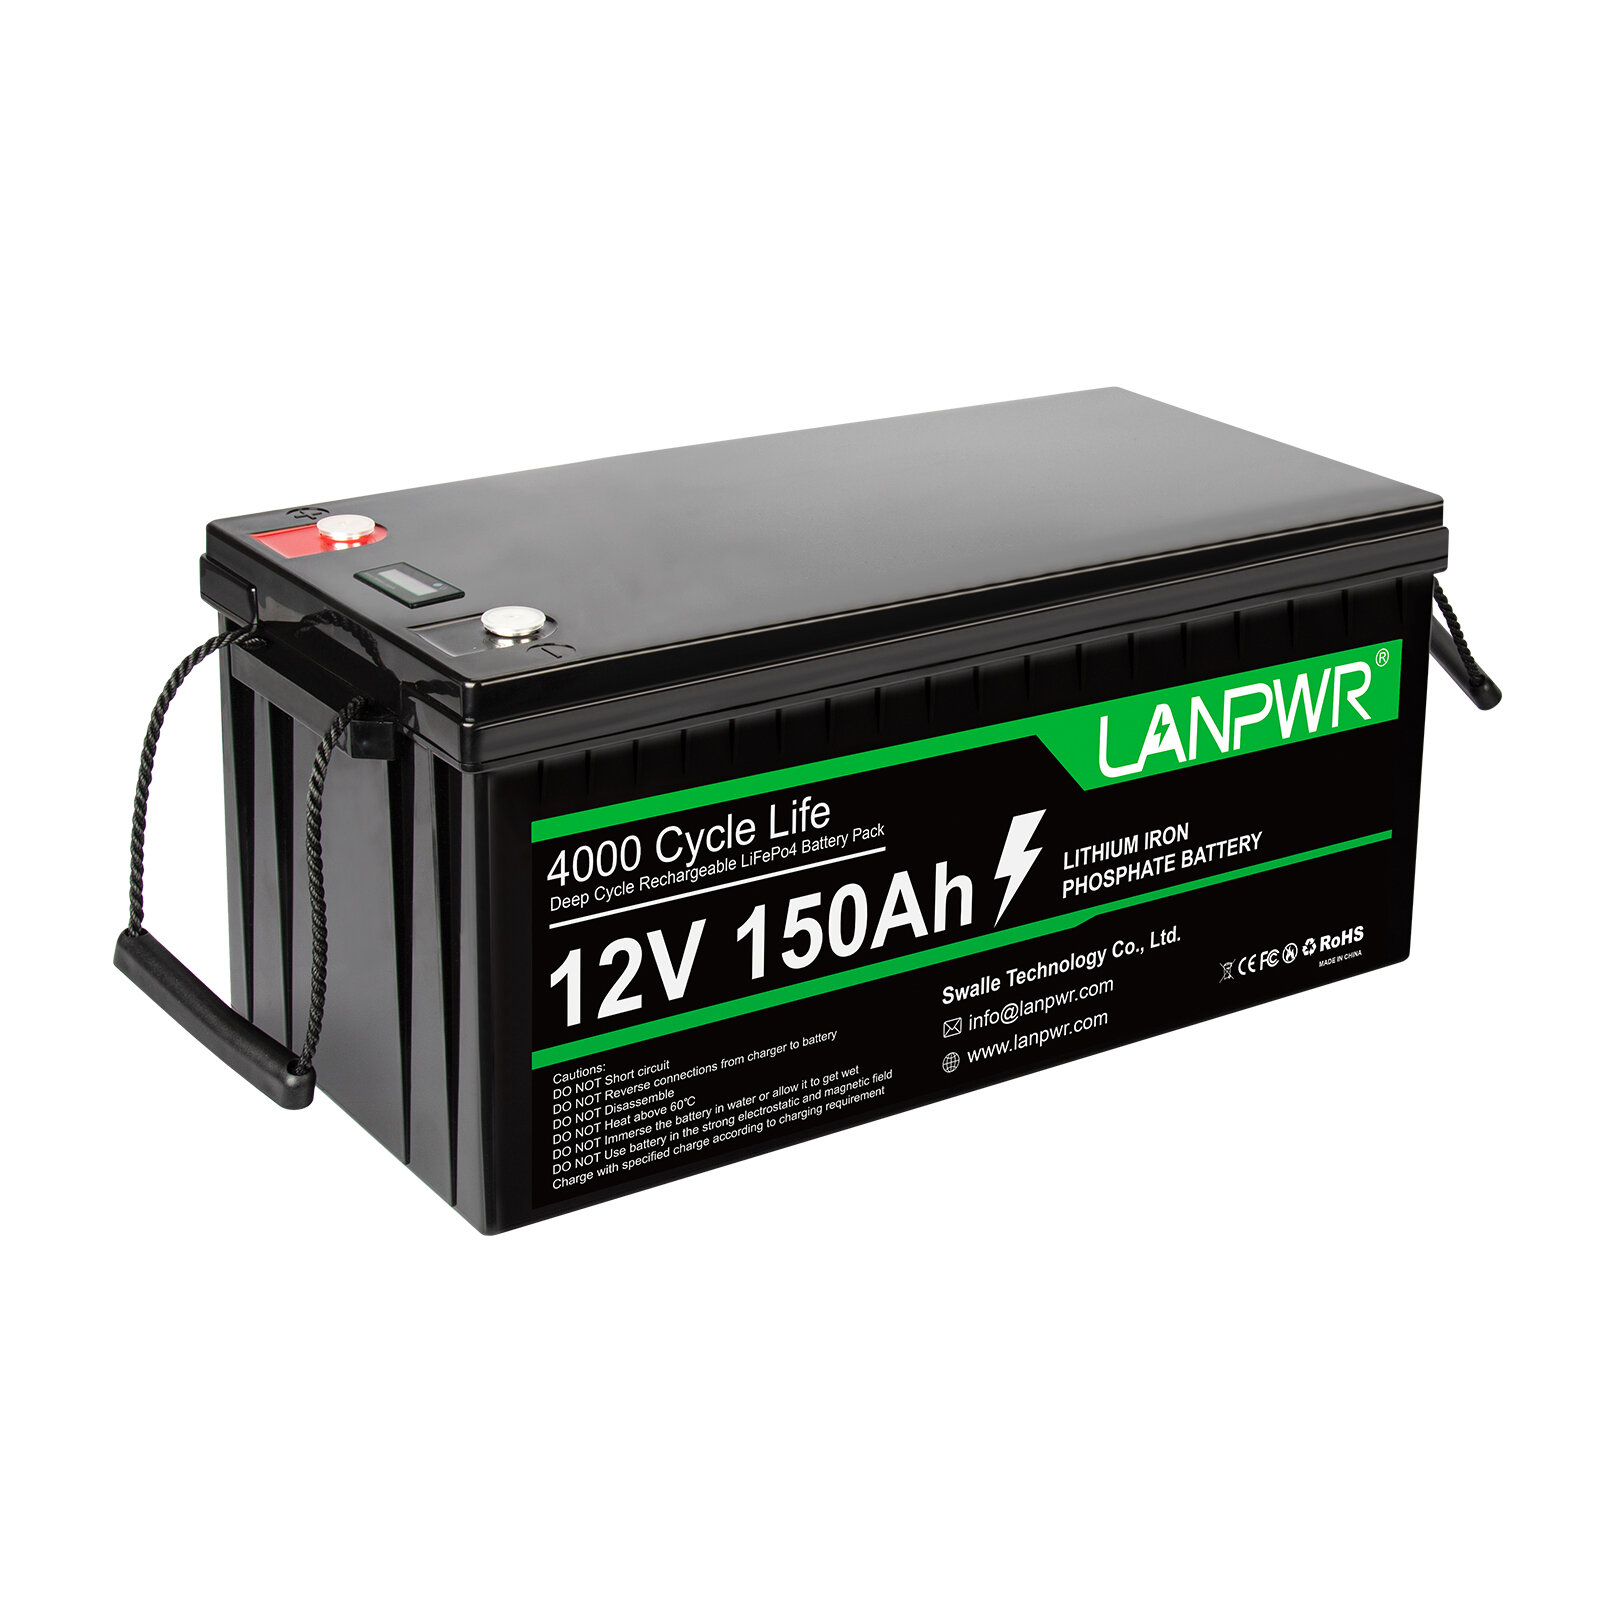 [EU Direct] LANPWR 12V 150Ah LiFePO4 Battery Pack 1920Wh Lithium Battery Built-in 100A BMS IP65 Waterproof for Replacing Most of Backup Power Home Energy Storage and Off-Grid